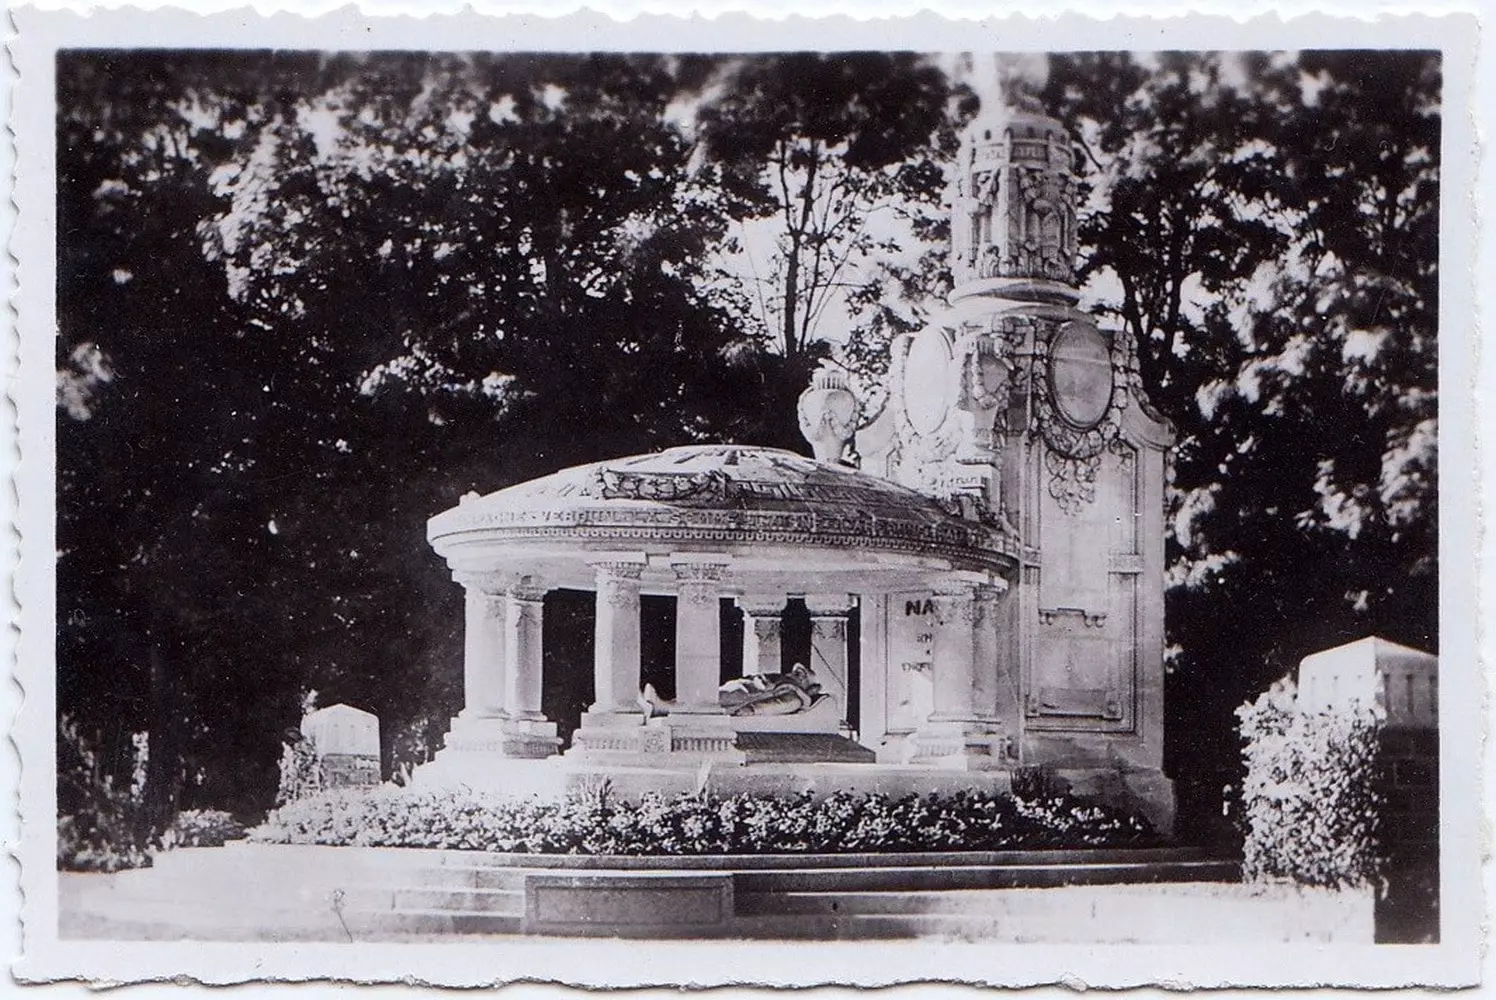 The Monument to the Fallen of the Great War in Nancy